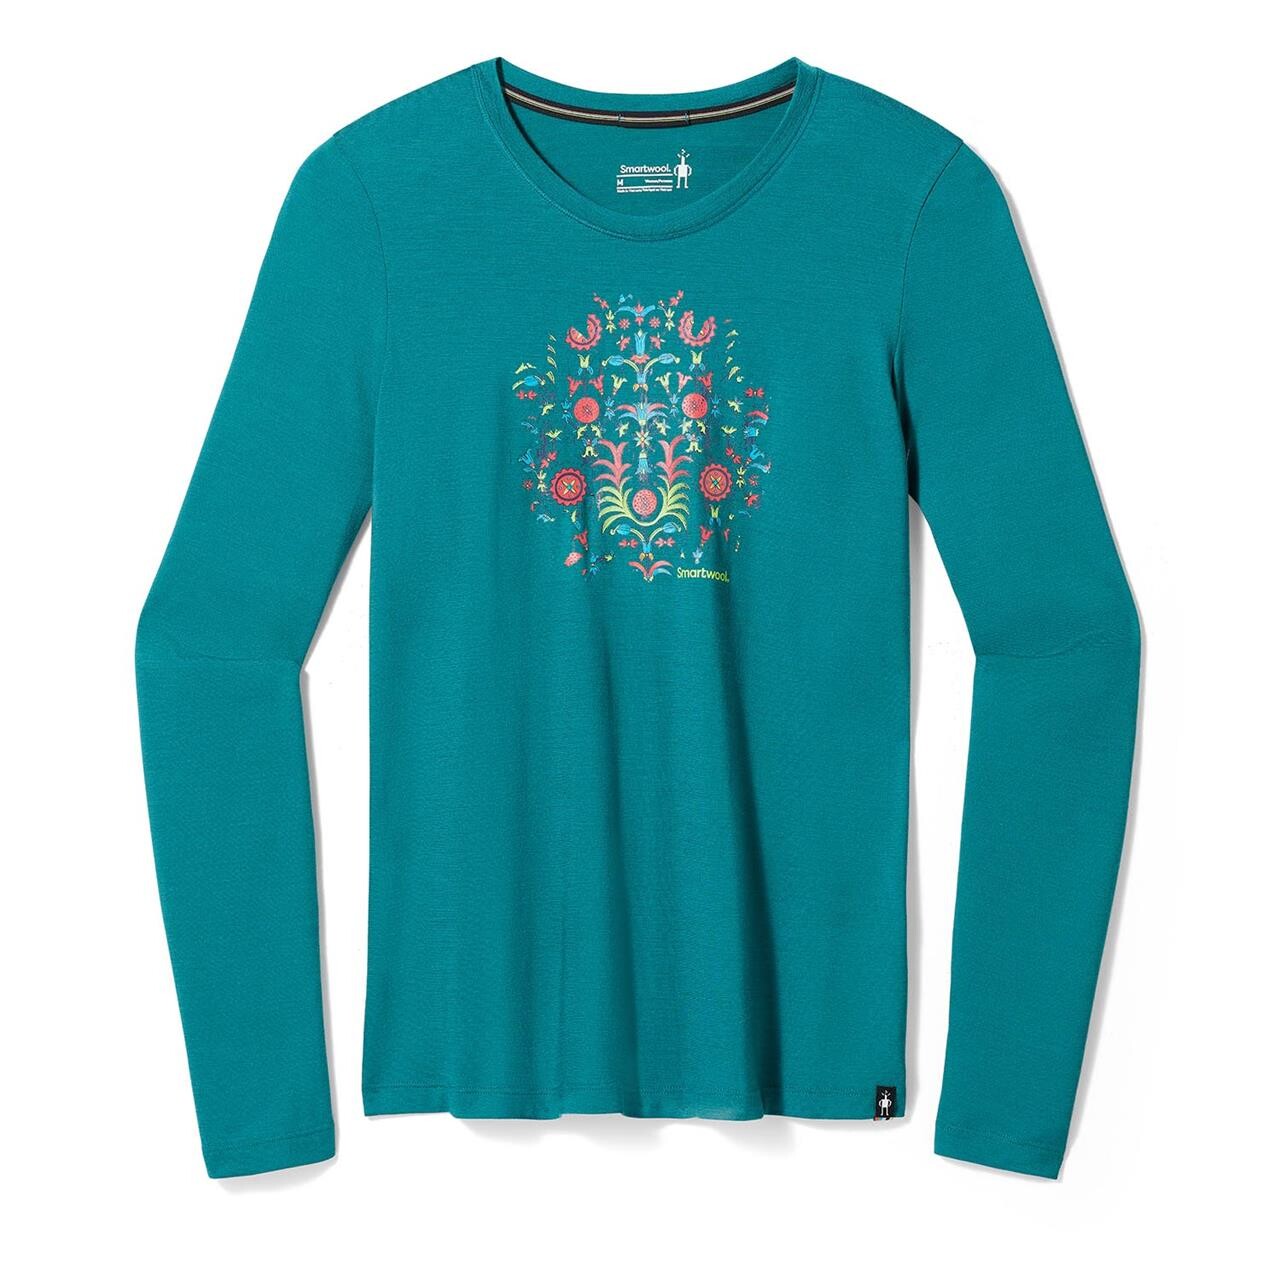 Se Smartwool Womens Floral Tundra Graphic L/S Tee (Grøn (EMERALD GREEN) Small) hos Friluftsland.dk